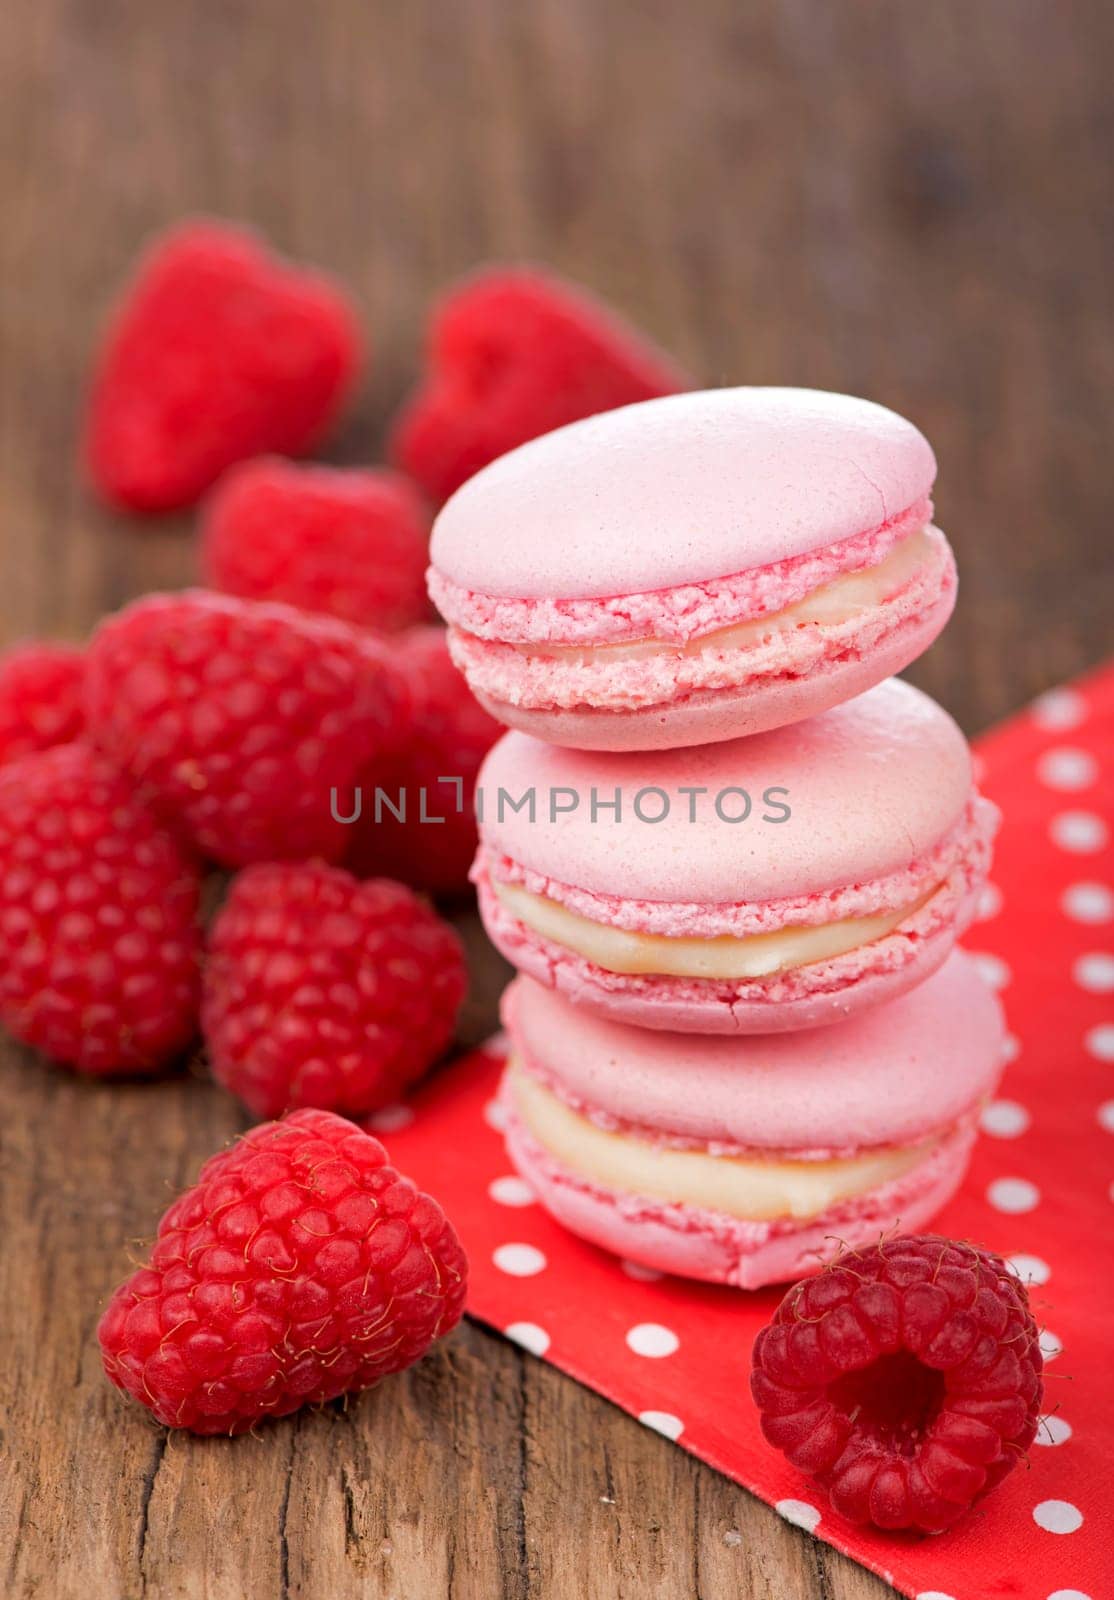 French makarons cake . Pink raspberry macaron cookies on dark wooden boards by aprilphoto